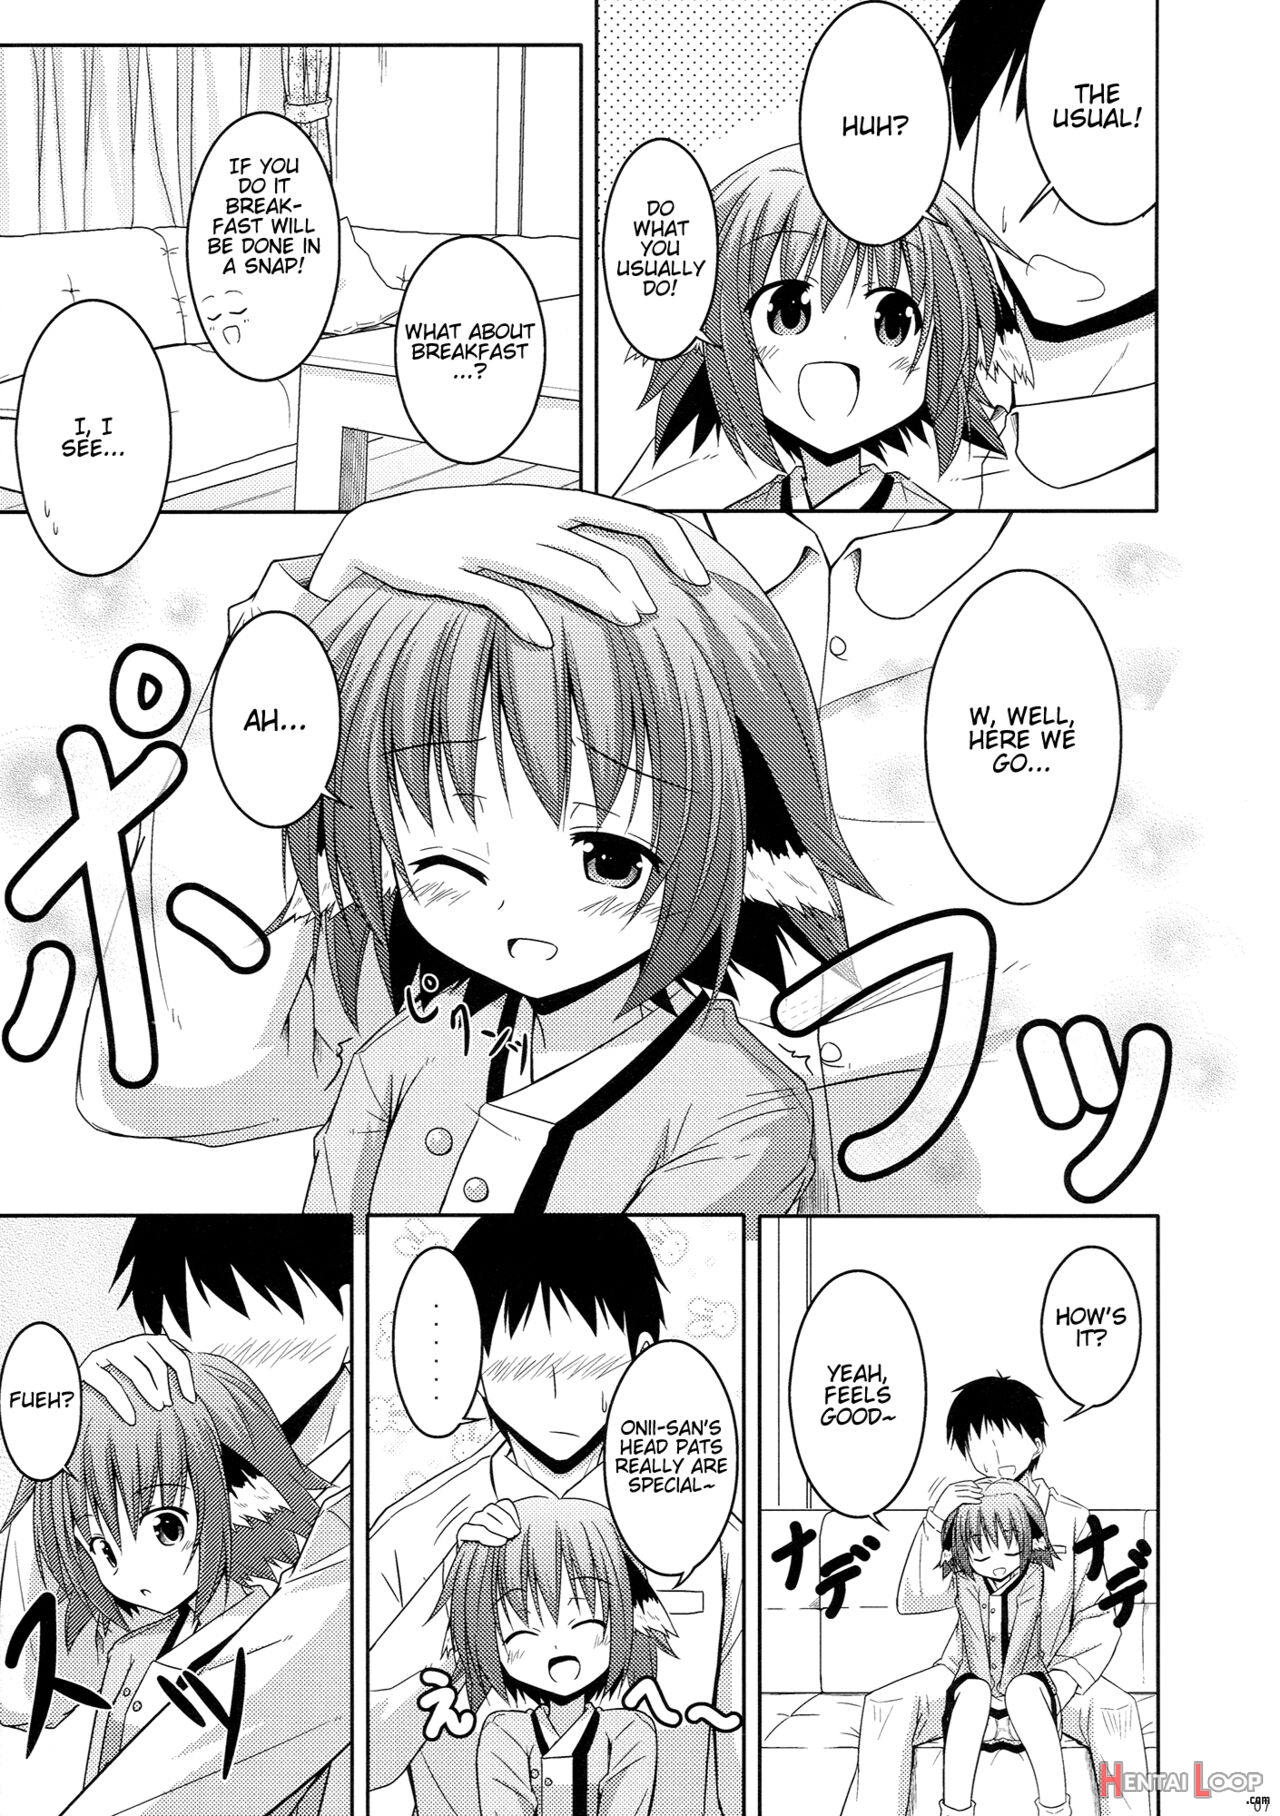 Kyouko's Daily Life page 6